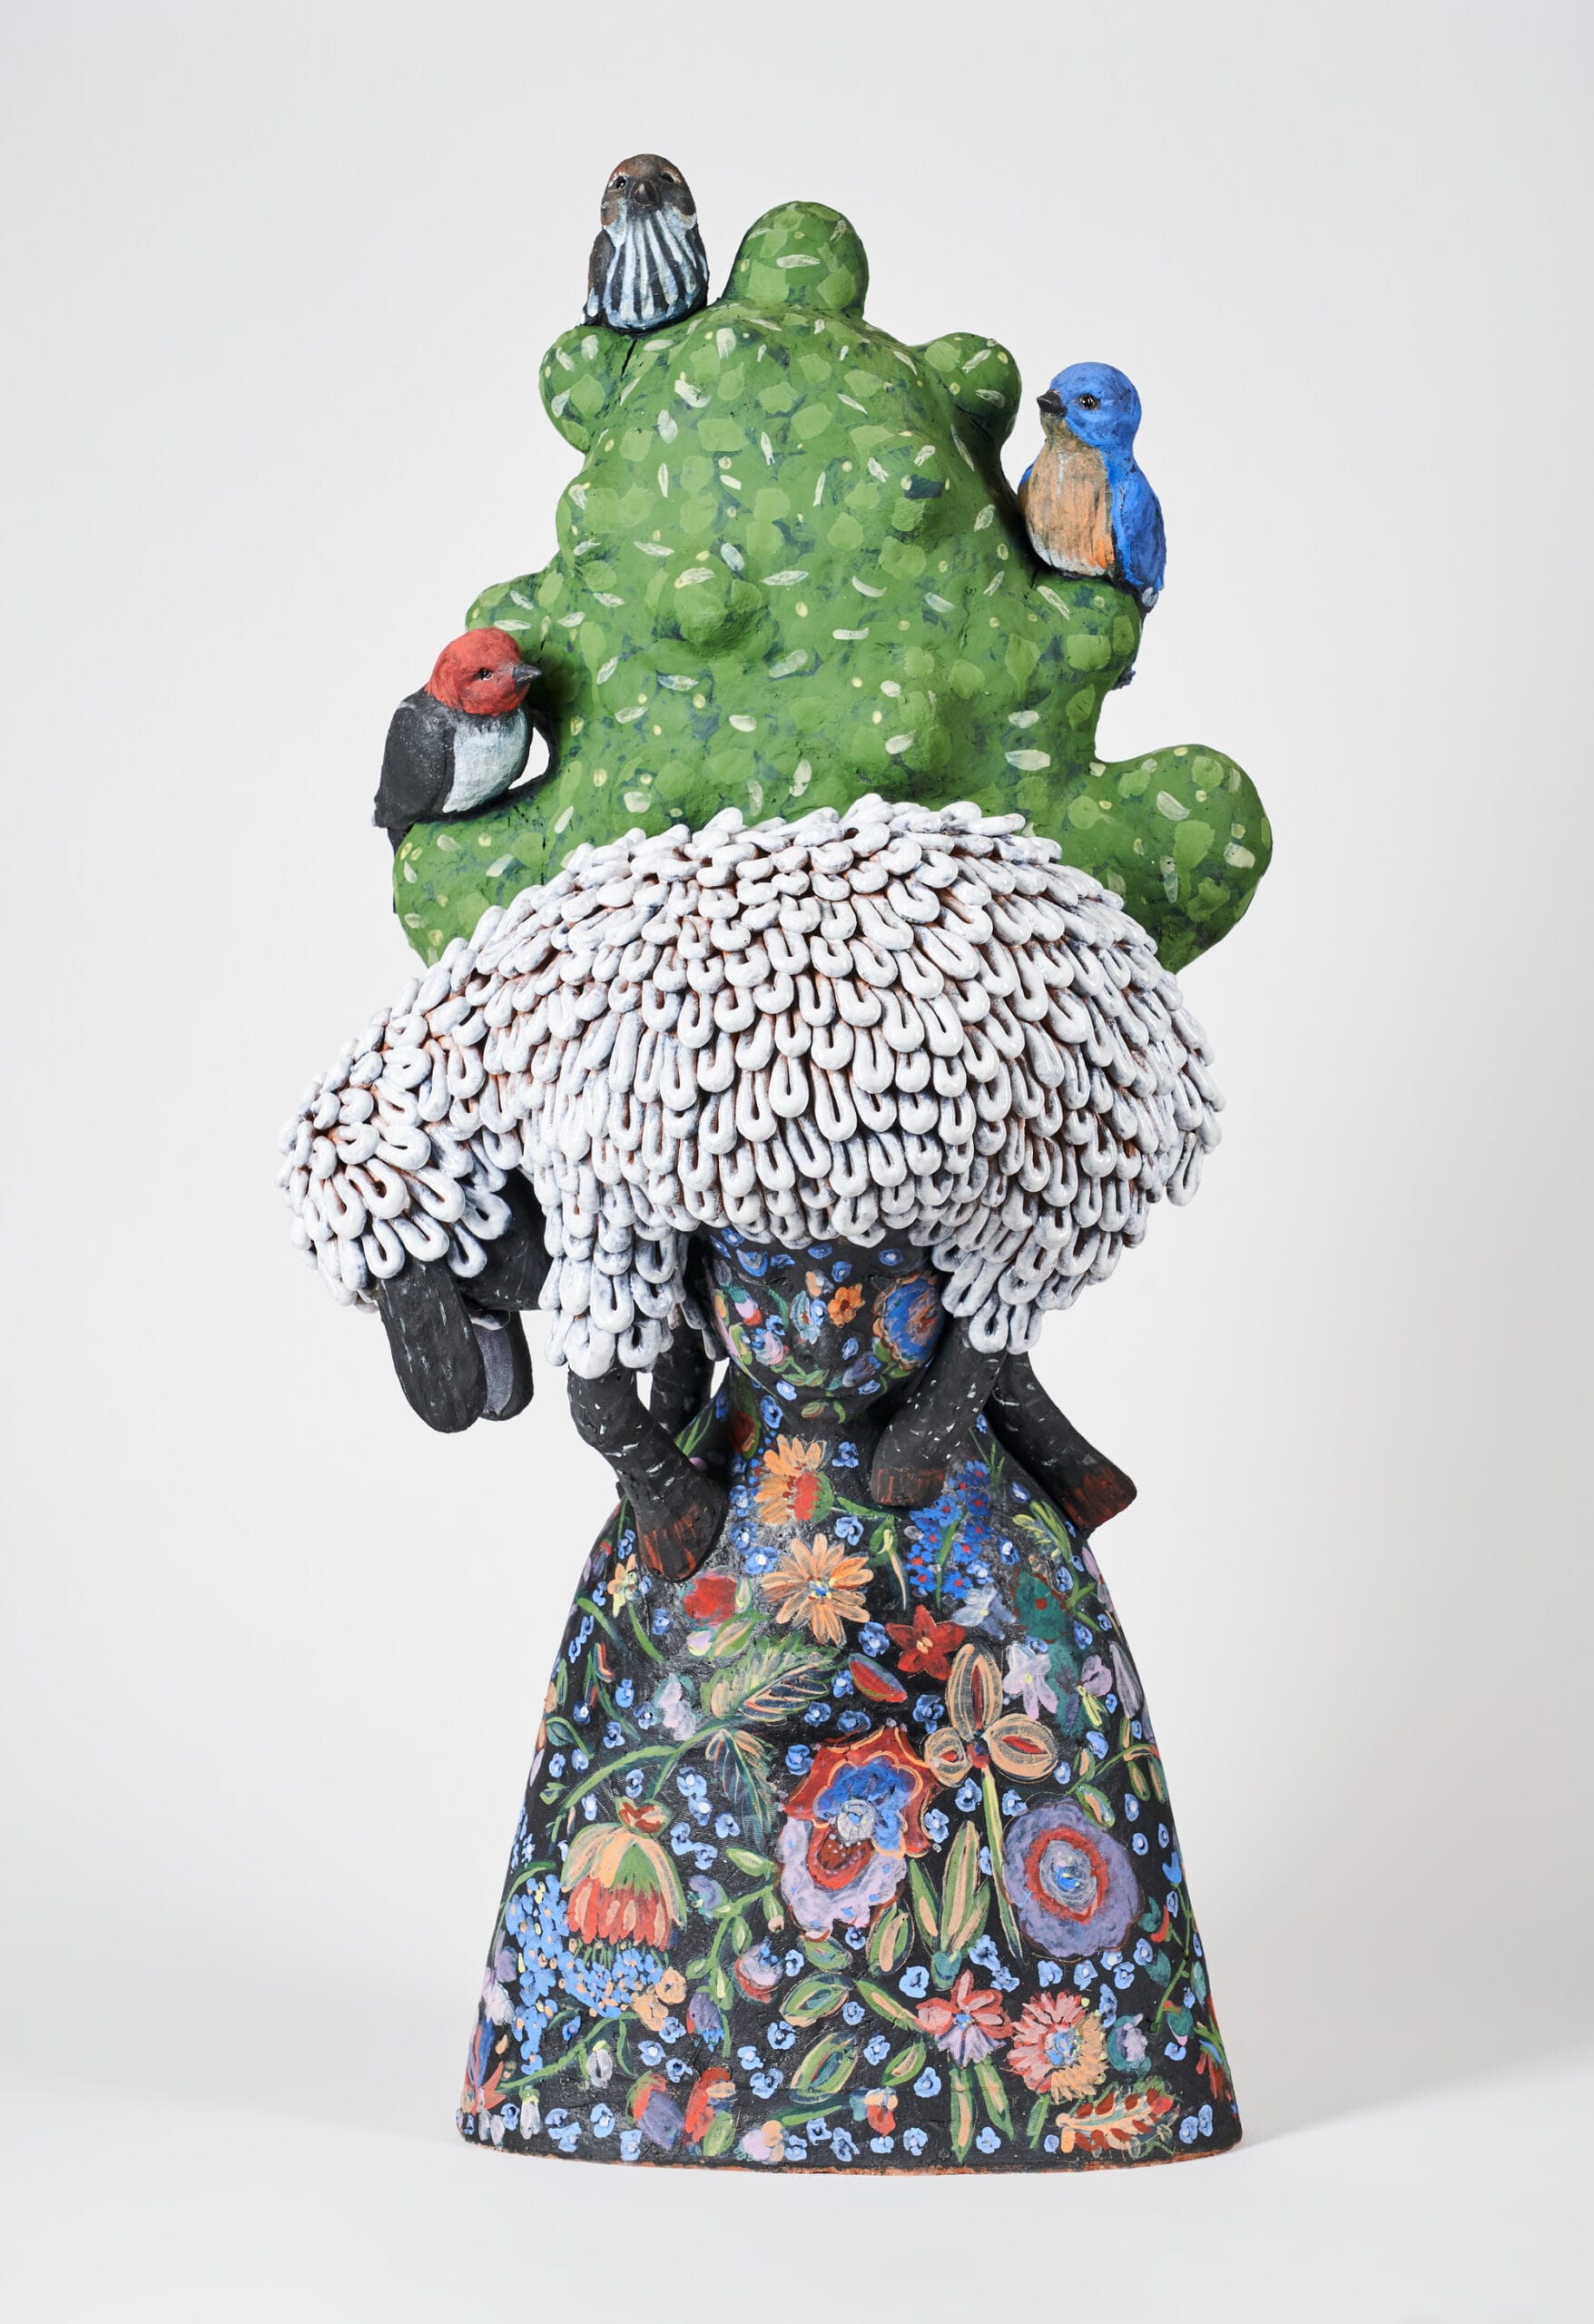 a ceramic sculpture of a figure covered in floral motifs with a lamb on its head. a tree with three birds nesting in it ascends upward.